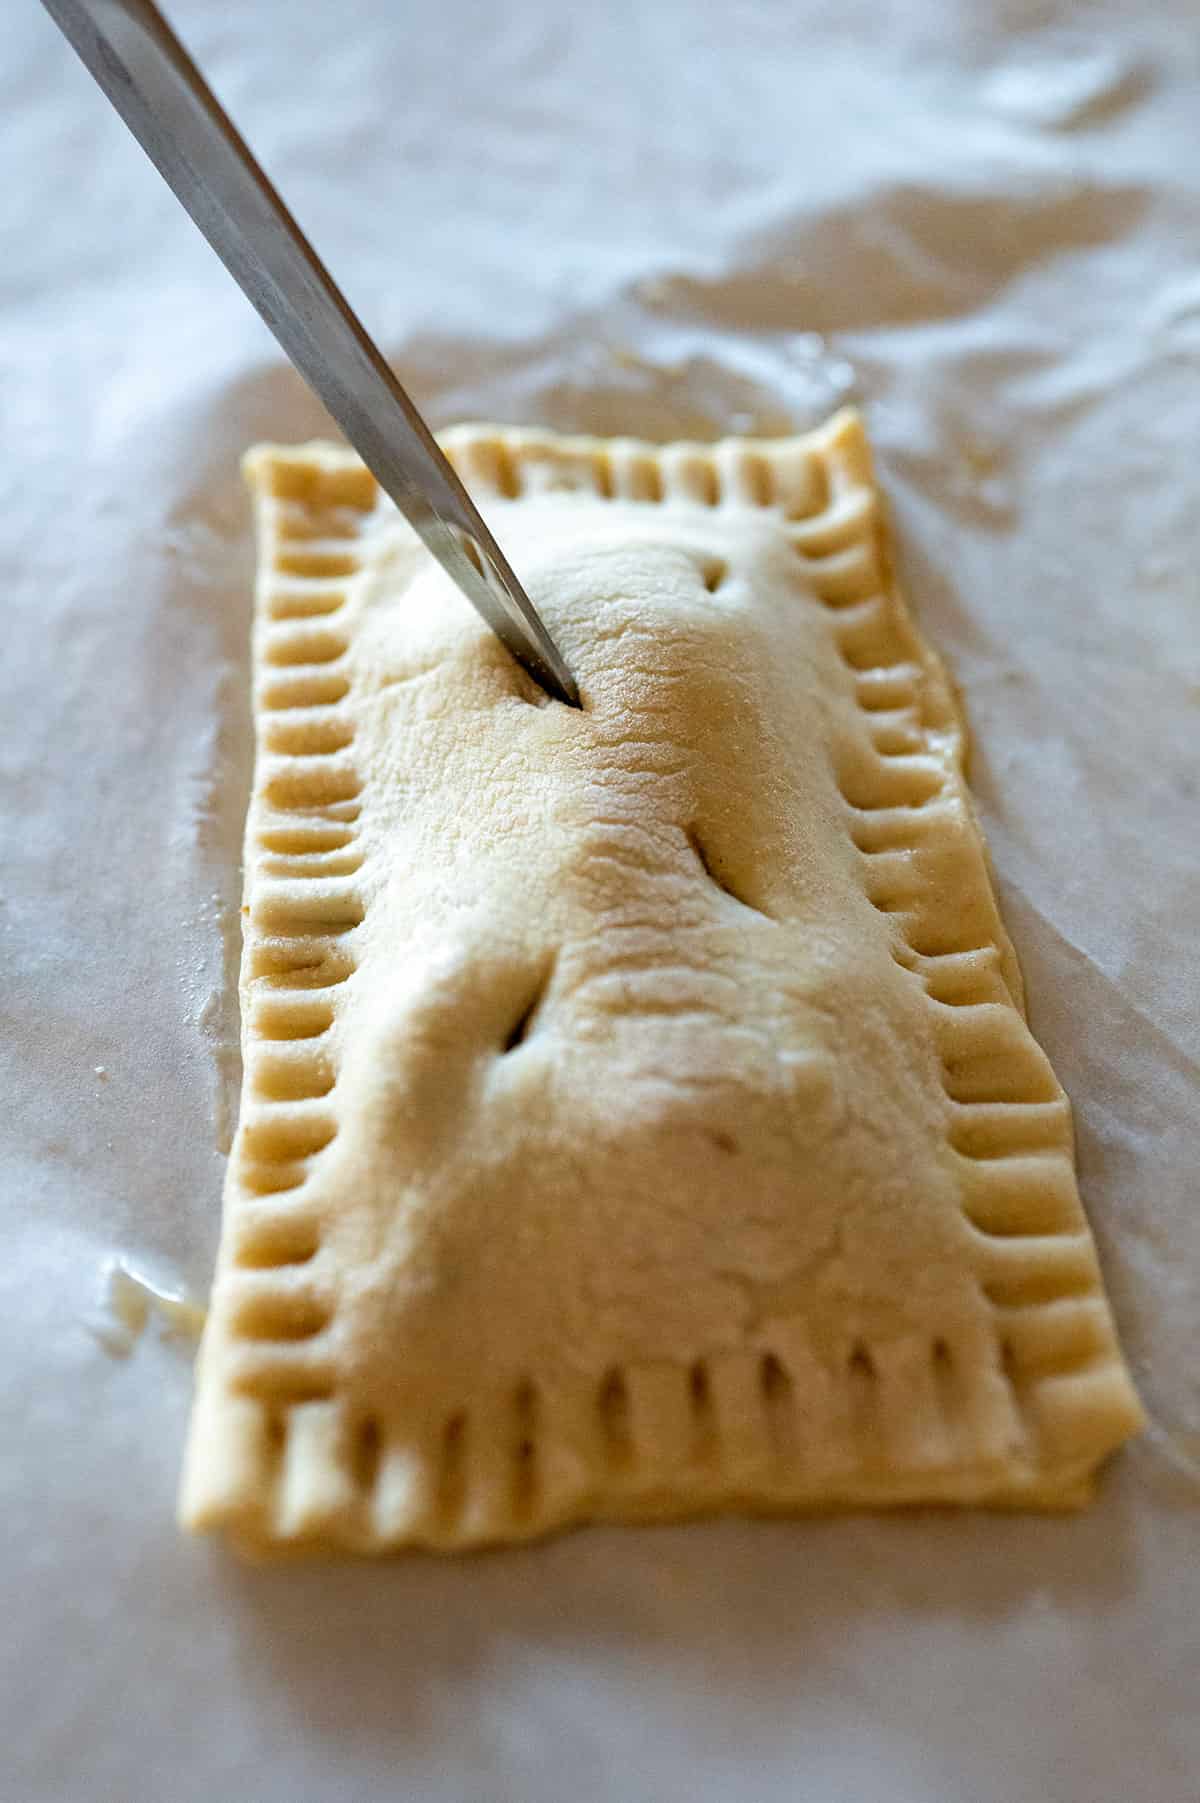 Piercing top layer of puff pastry with a knife.